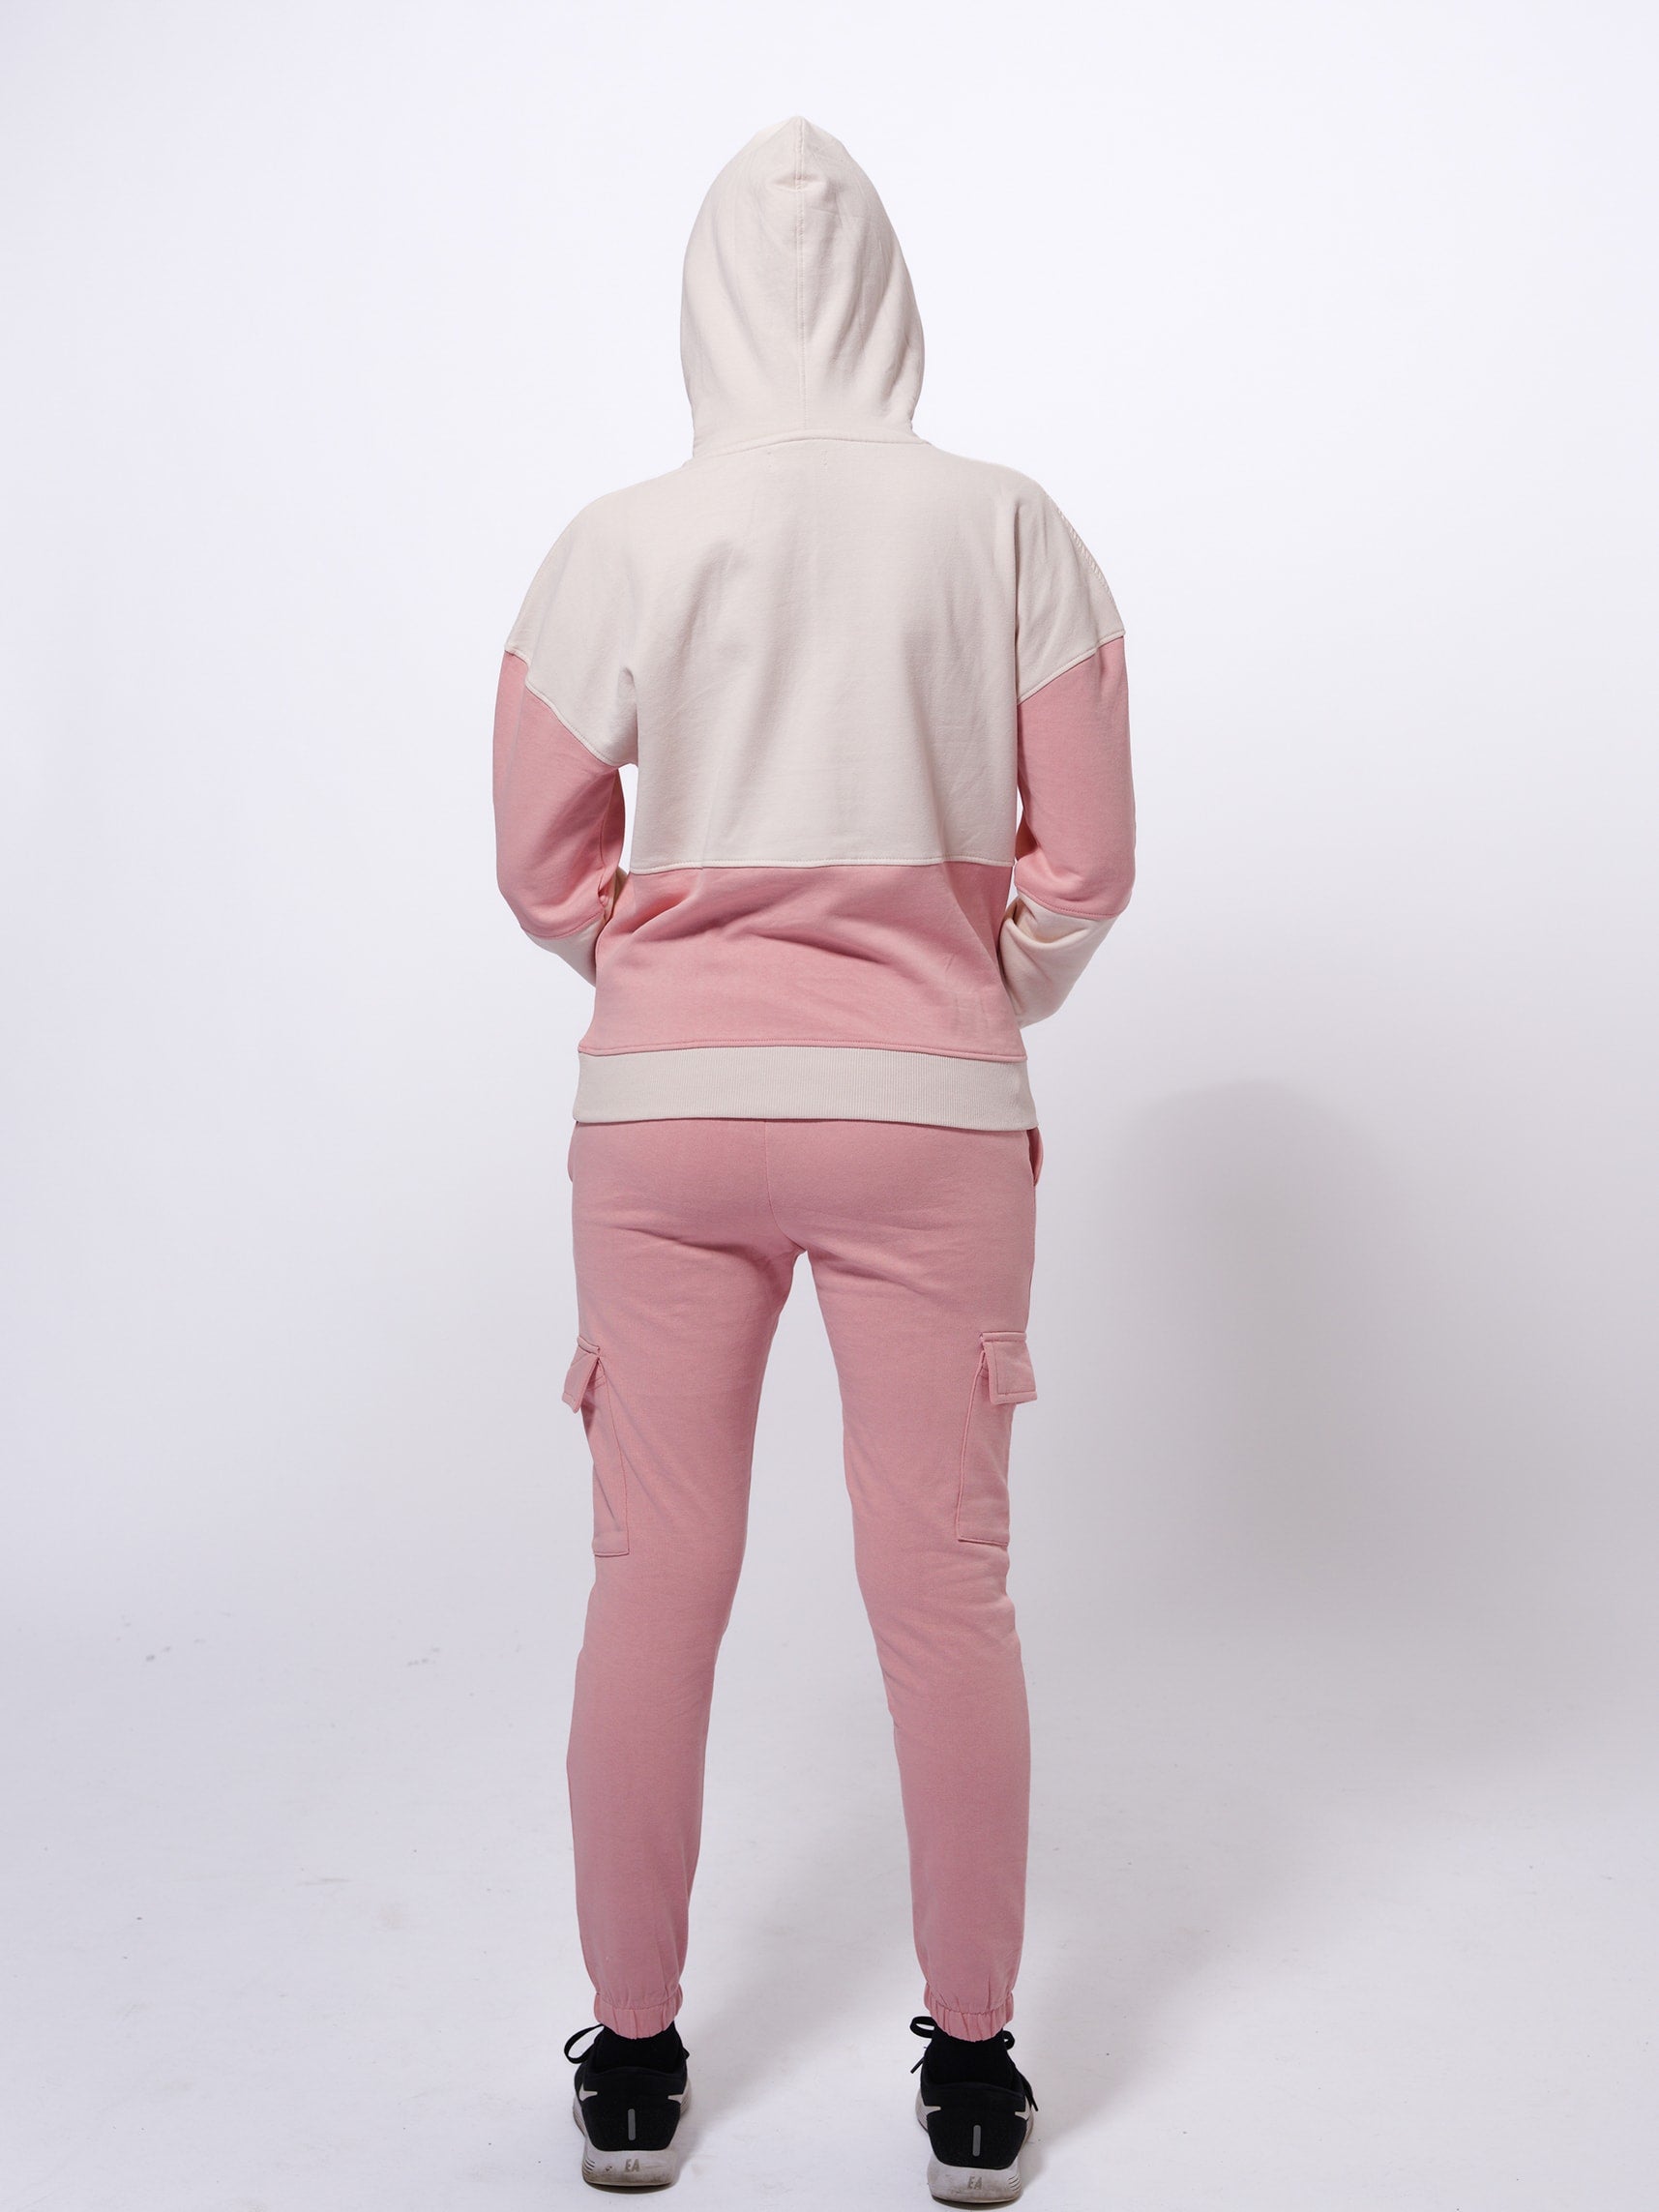 Women's Pink Hoodies & Joggers Set in Premium Cotton | Stylish Lounge and Relaxation Wear - inteblu